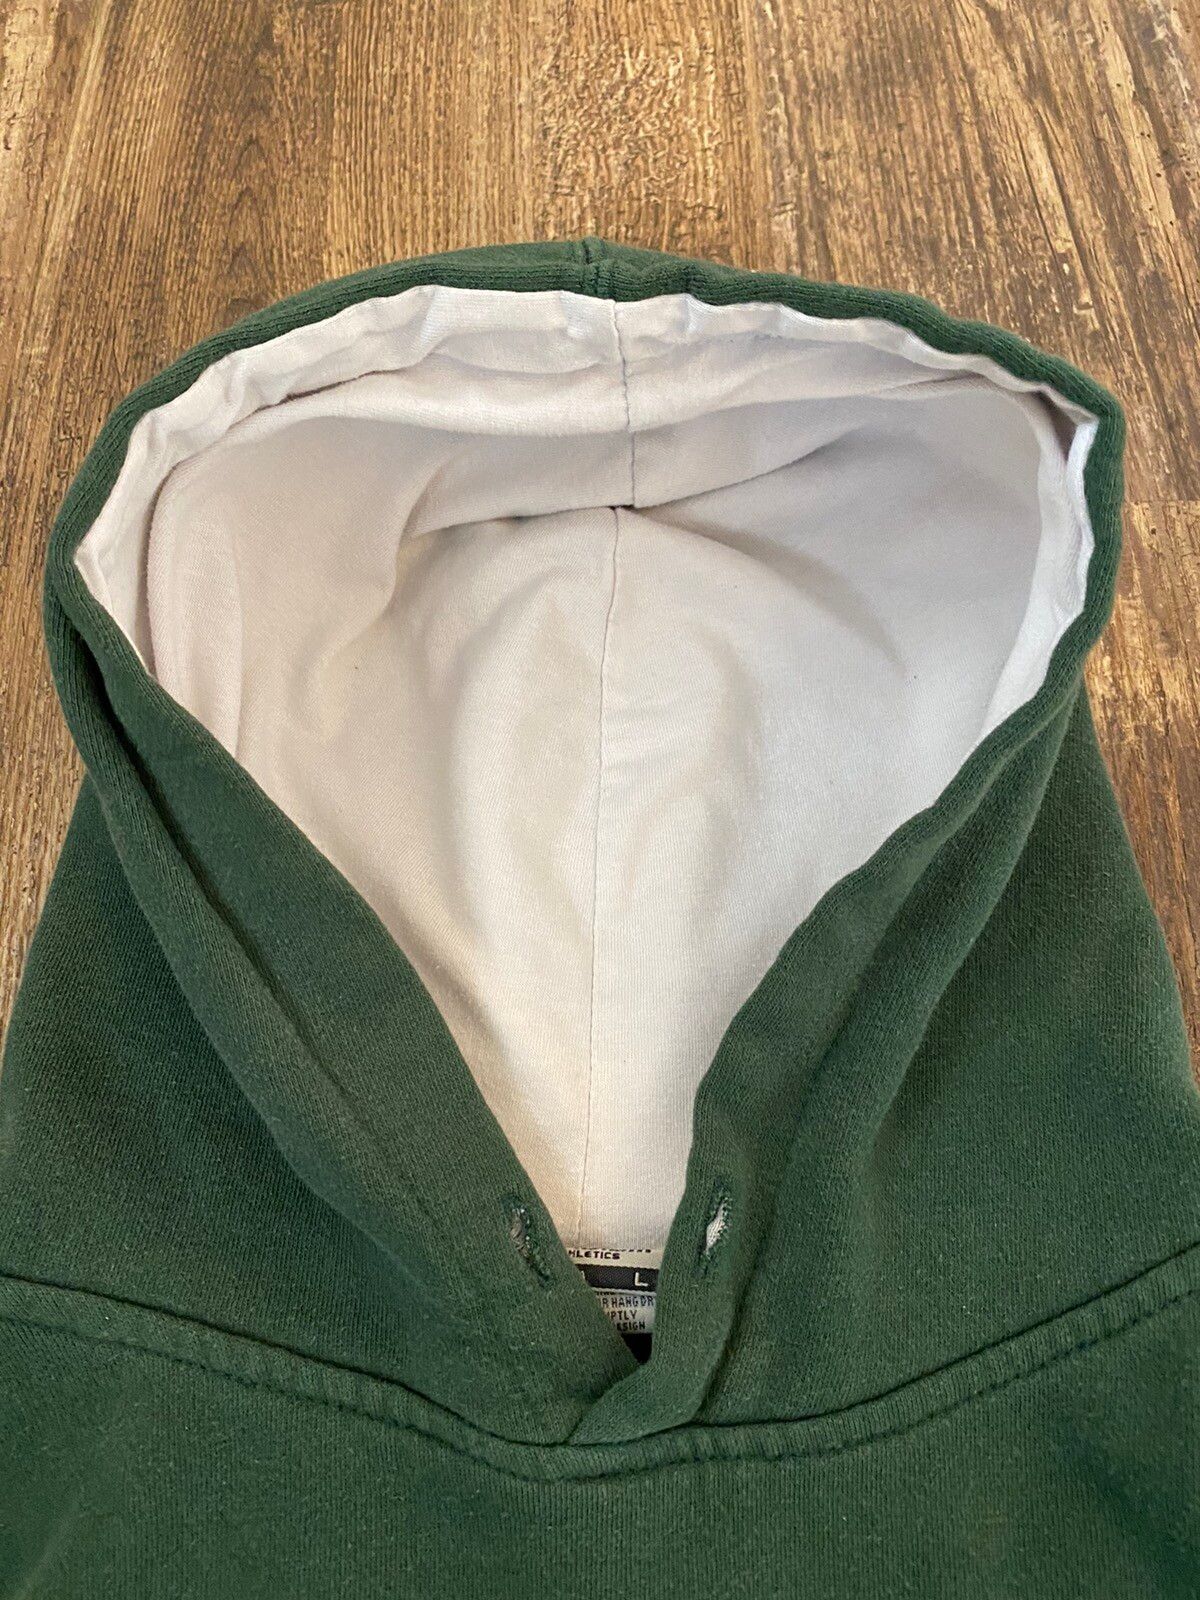 Vintage Y2K 2000s Faded Michigan State Spartans Spellout Hoodie Size US S / EU 44-46 / 1 - 5 Thumbnail